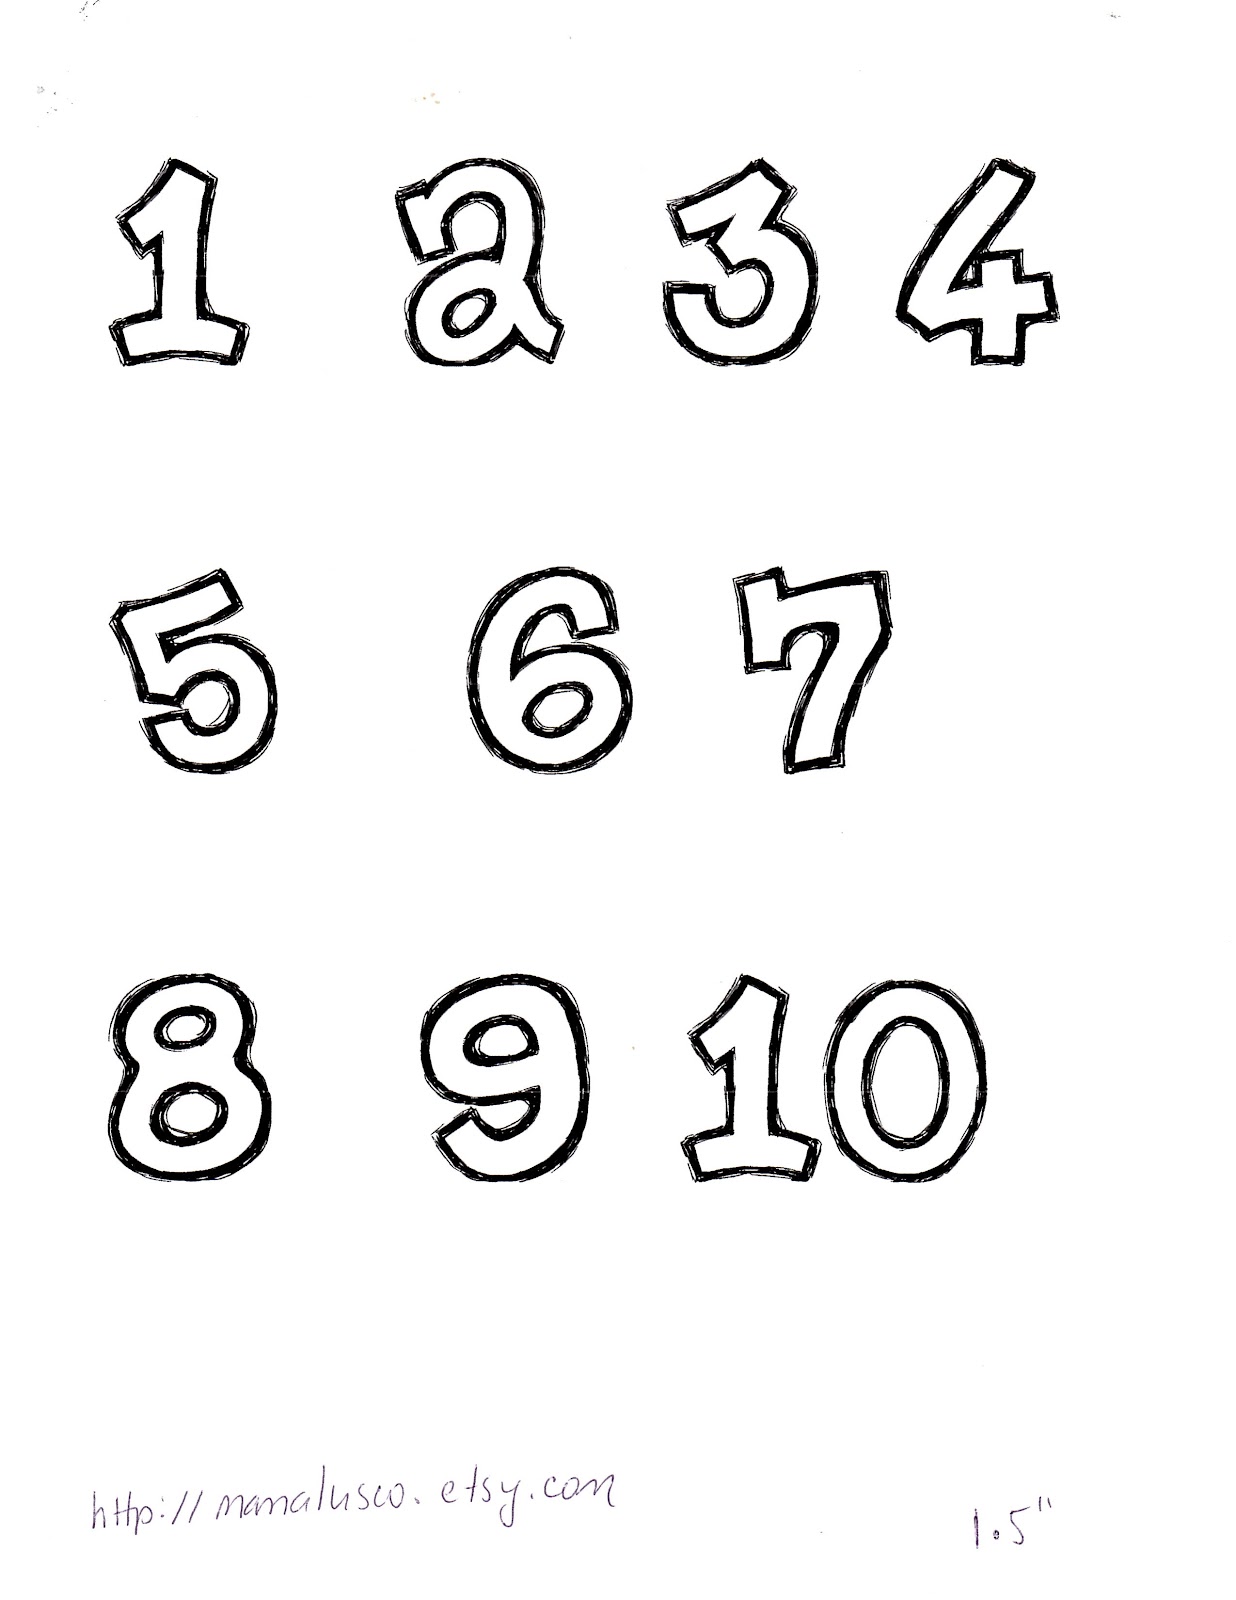 Number Templates Free Printable